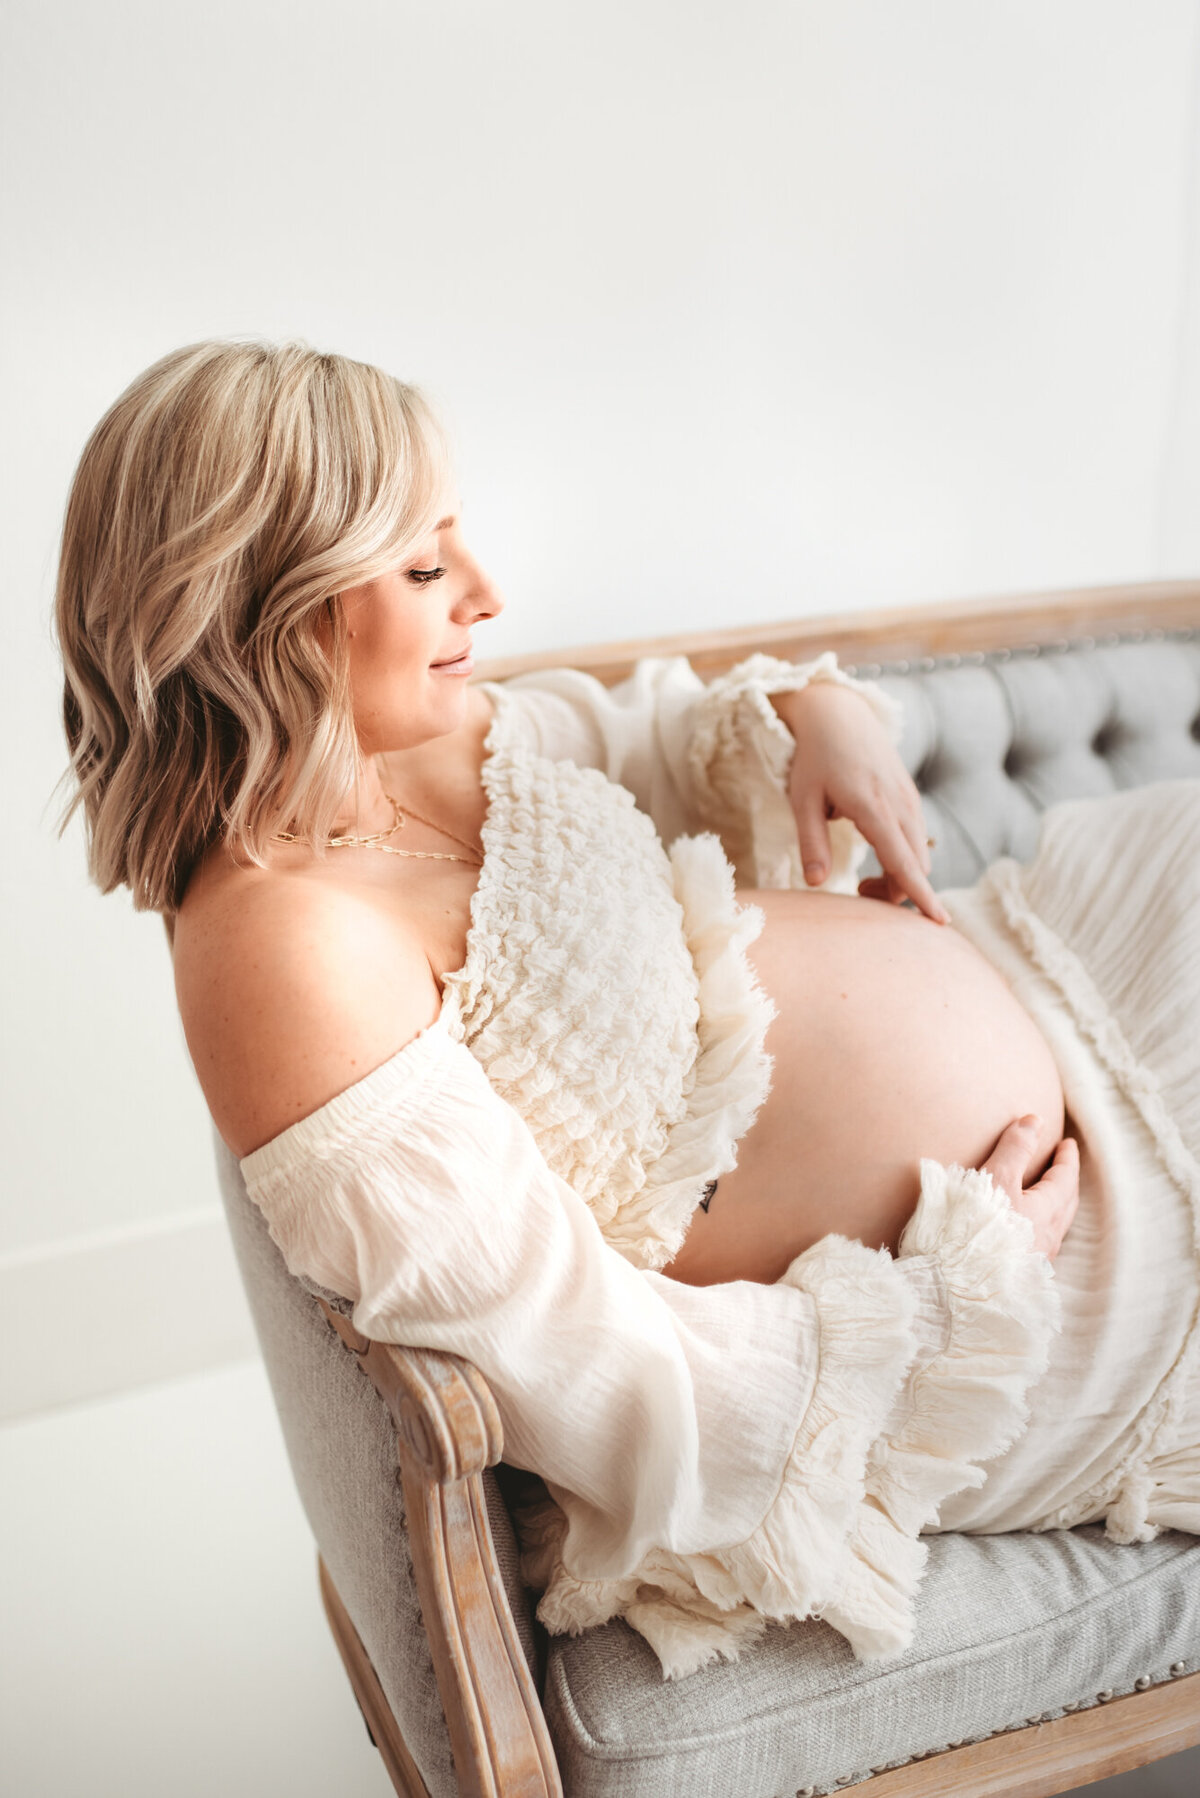 pregnant woman sitting on chair rubbing her belly